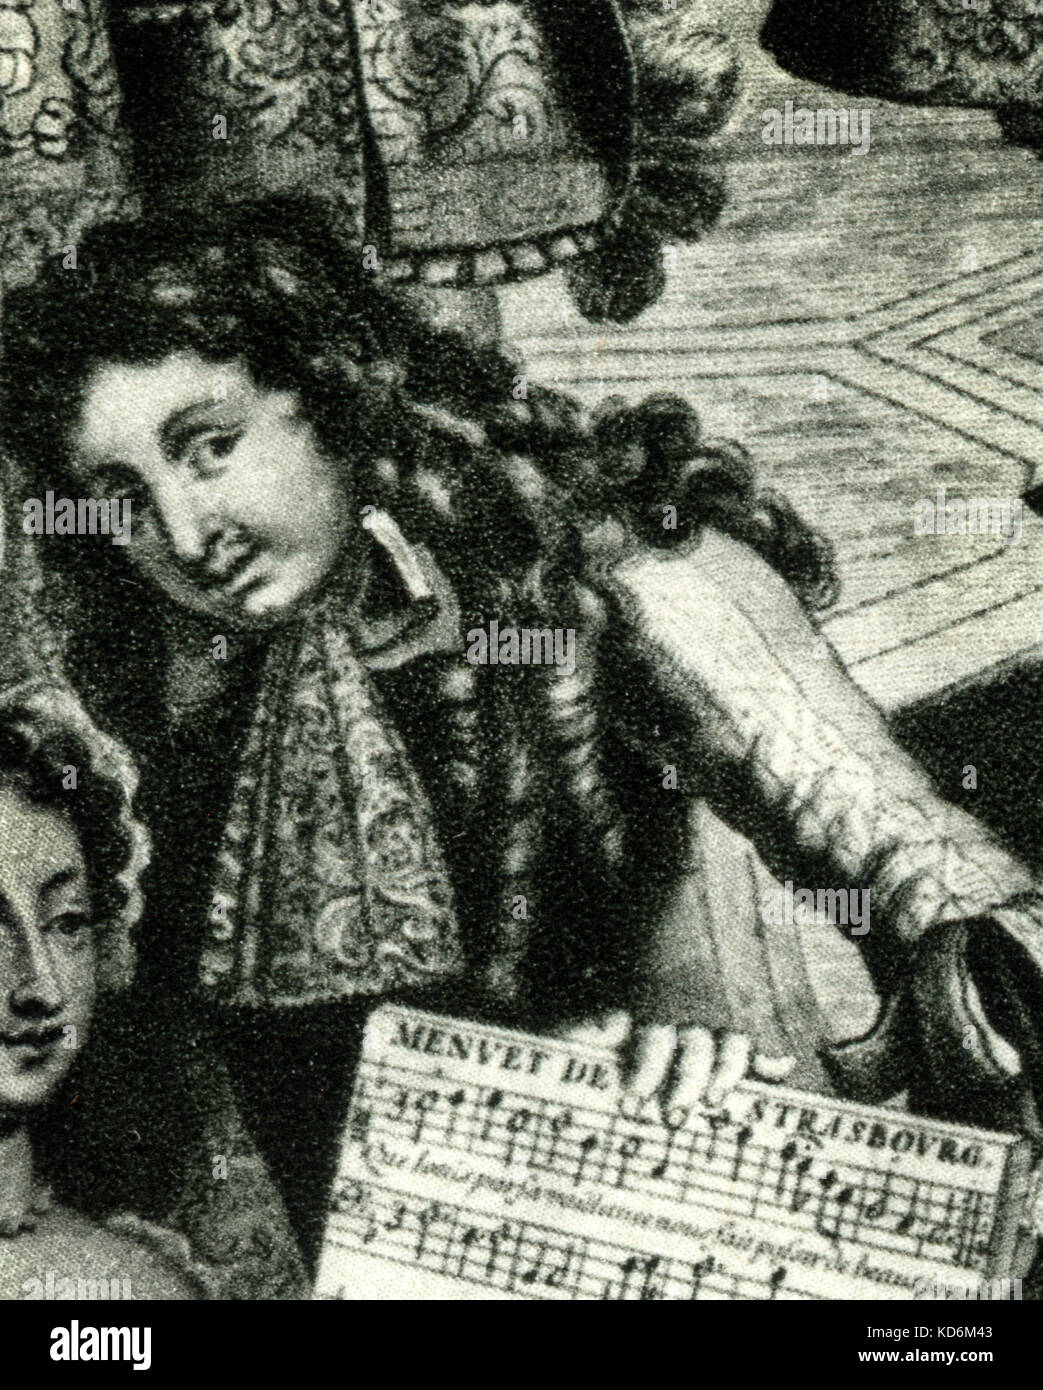 Marc-Antoine Charpentier - portrait - detail from  engraving by Landry entitled 'The Royal Almanac of 1682' & celebrating Louis XIV's military victory in Alsace. Score is excerpt from Menuet de Strasbourg by Charpentier. Louis XIV dancing minuet.  Thought to be Marc-Antoine Charpentier holding score and only portrait in existence-according to MA Charpentier Society . Stock Photo